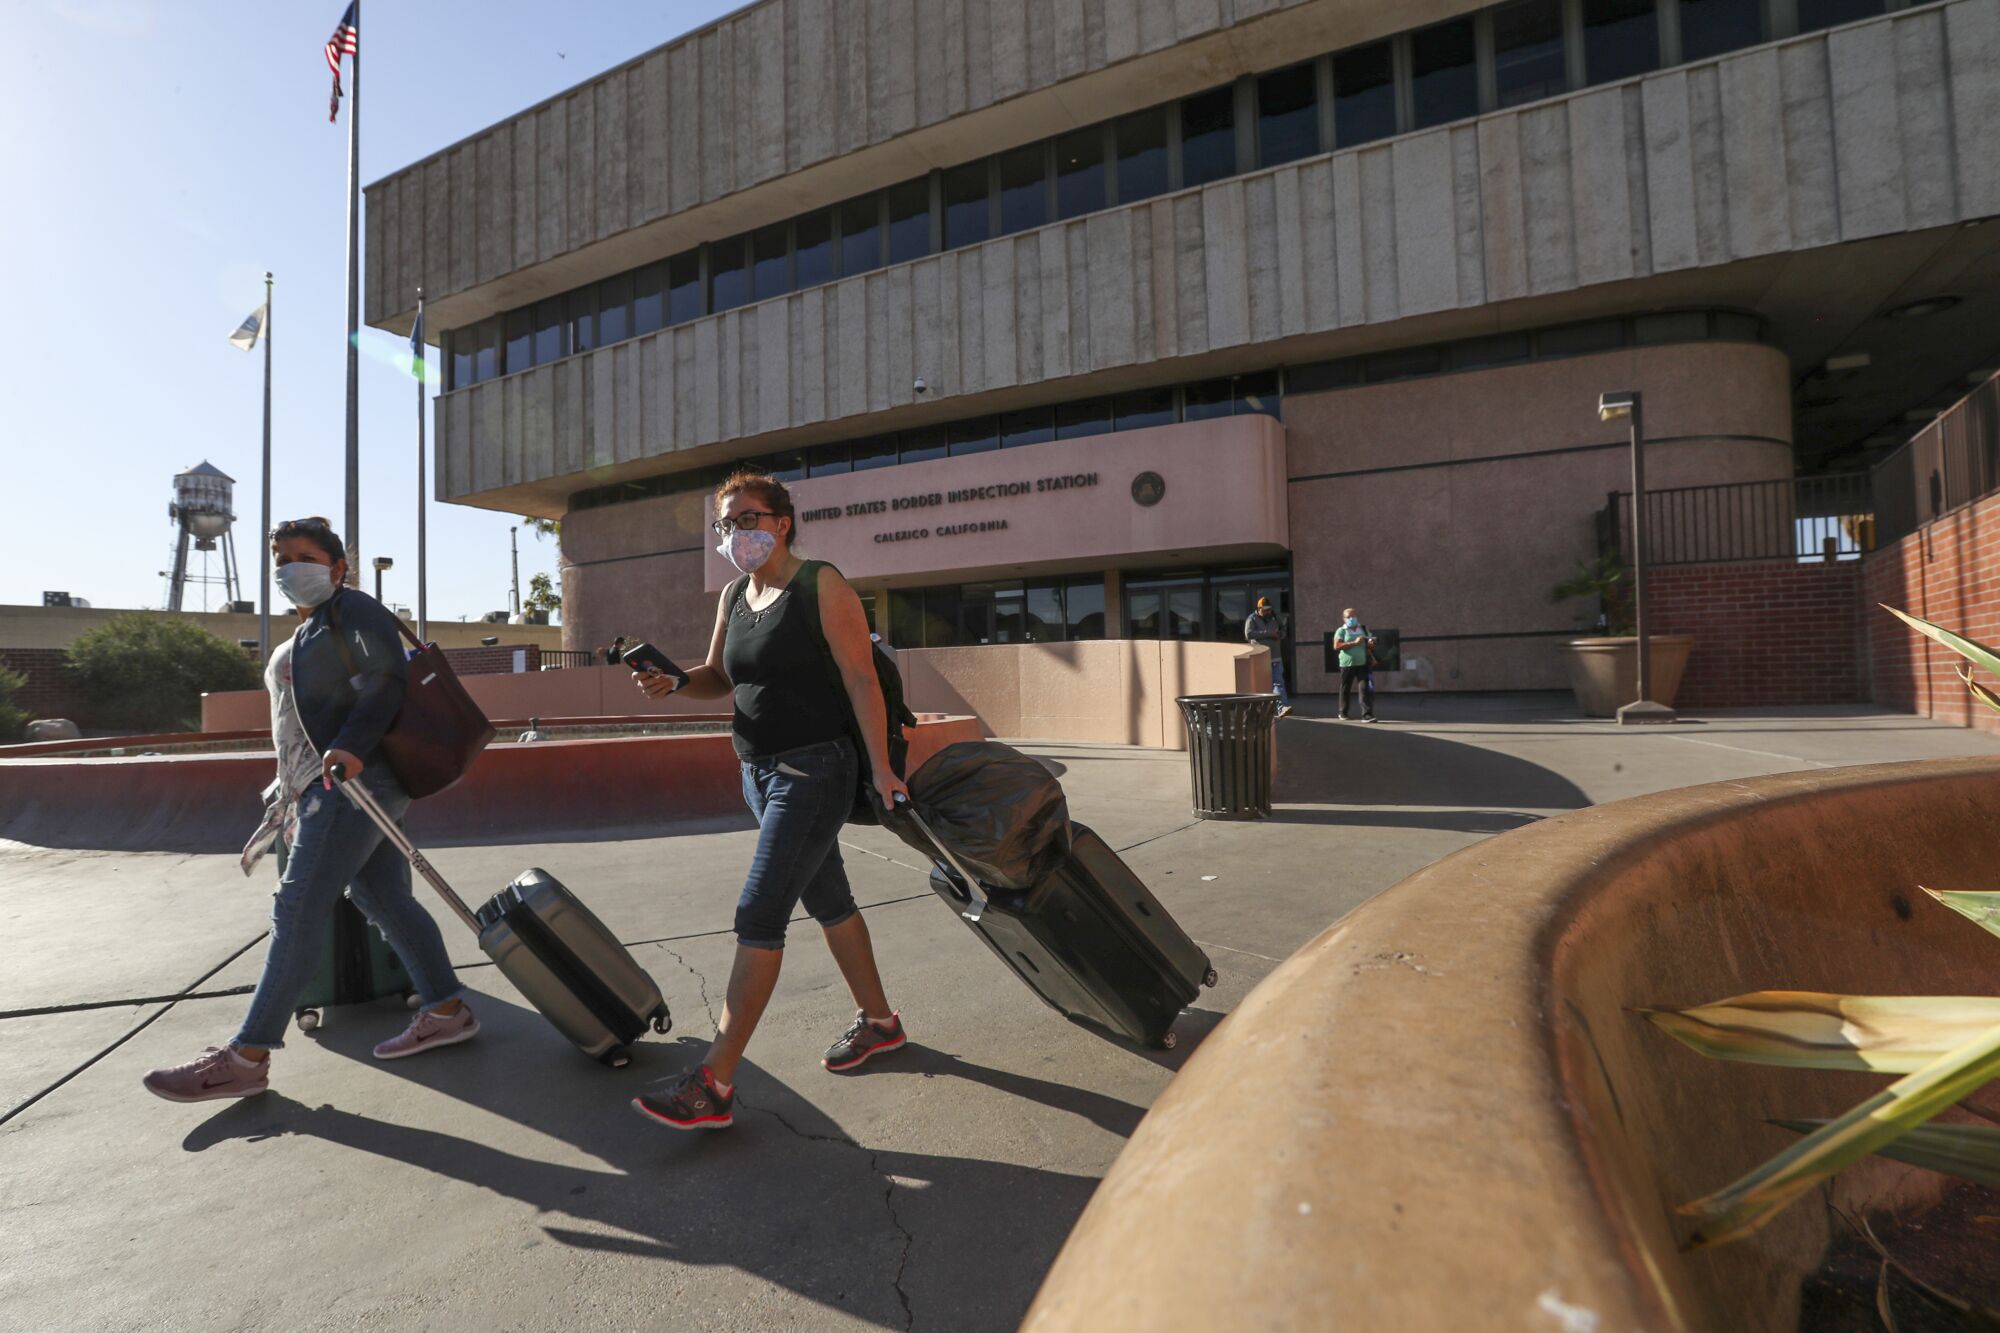 Two women wearing masks enter the United States from Mexicali at the border crossing in Calexico.